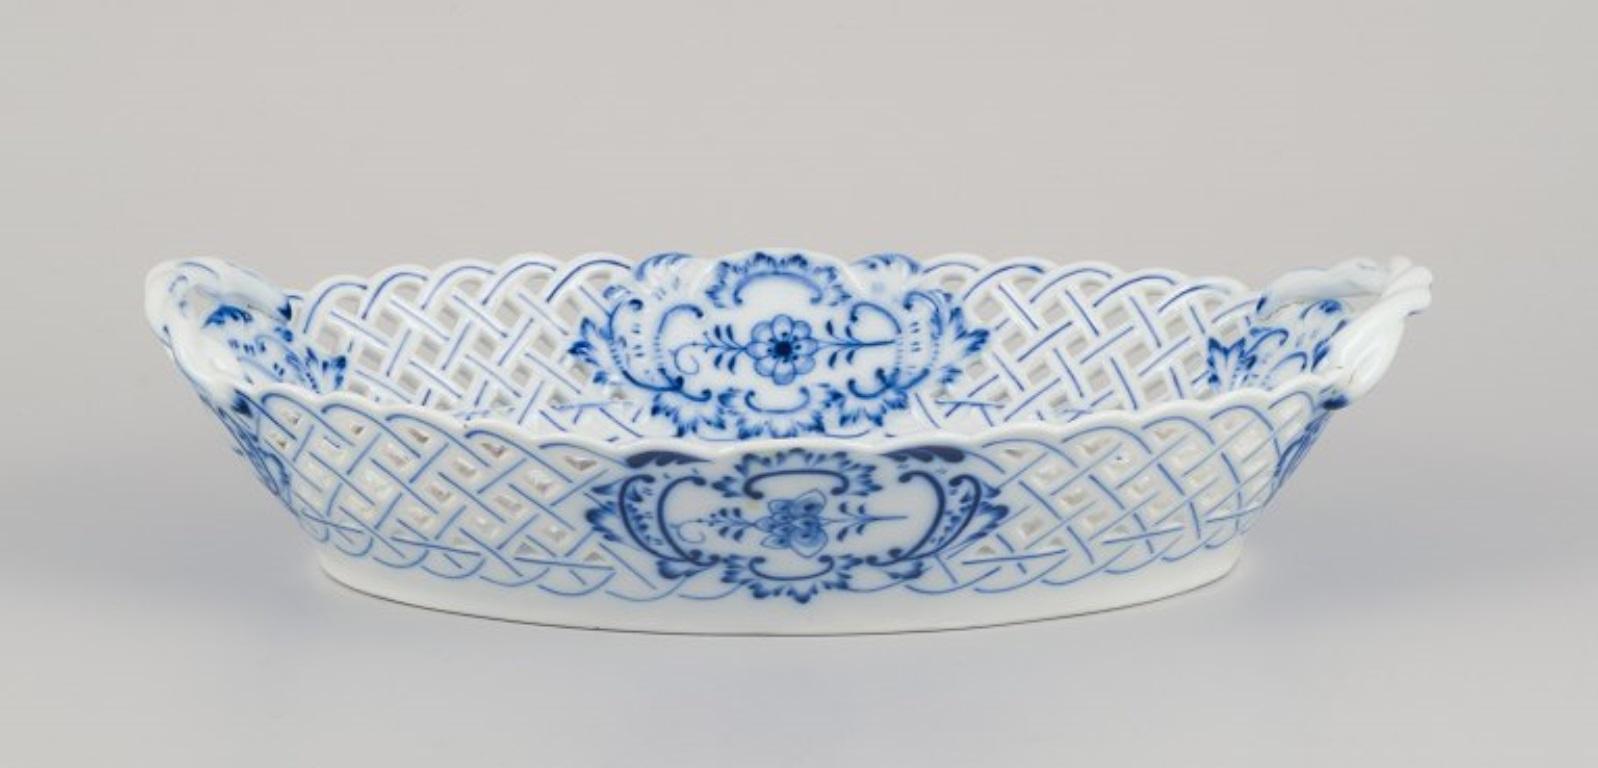 Stadt Meissen, Germany. Blue Onion pattern open lace bowl in hand-painted porcelain.
Approximately from the 1930s.
Marked.
In excellent condition with minor signs of use.
Dimensions: Length 28.5 cm x Width 20.0 cm x Height 5.2 cm.

